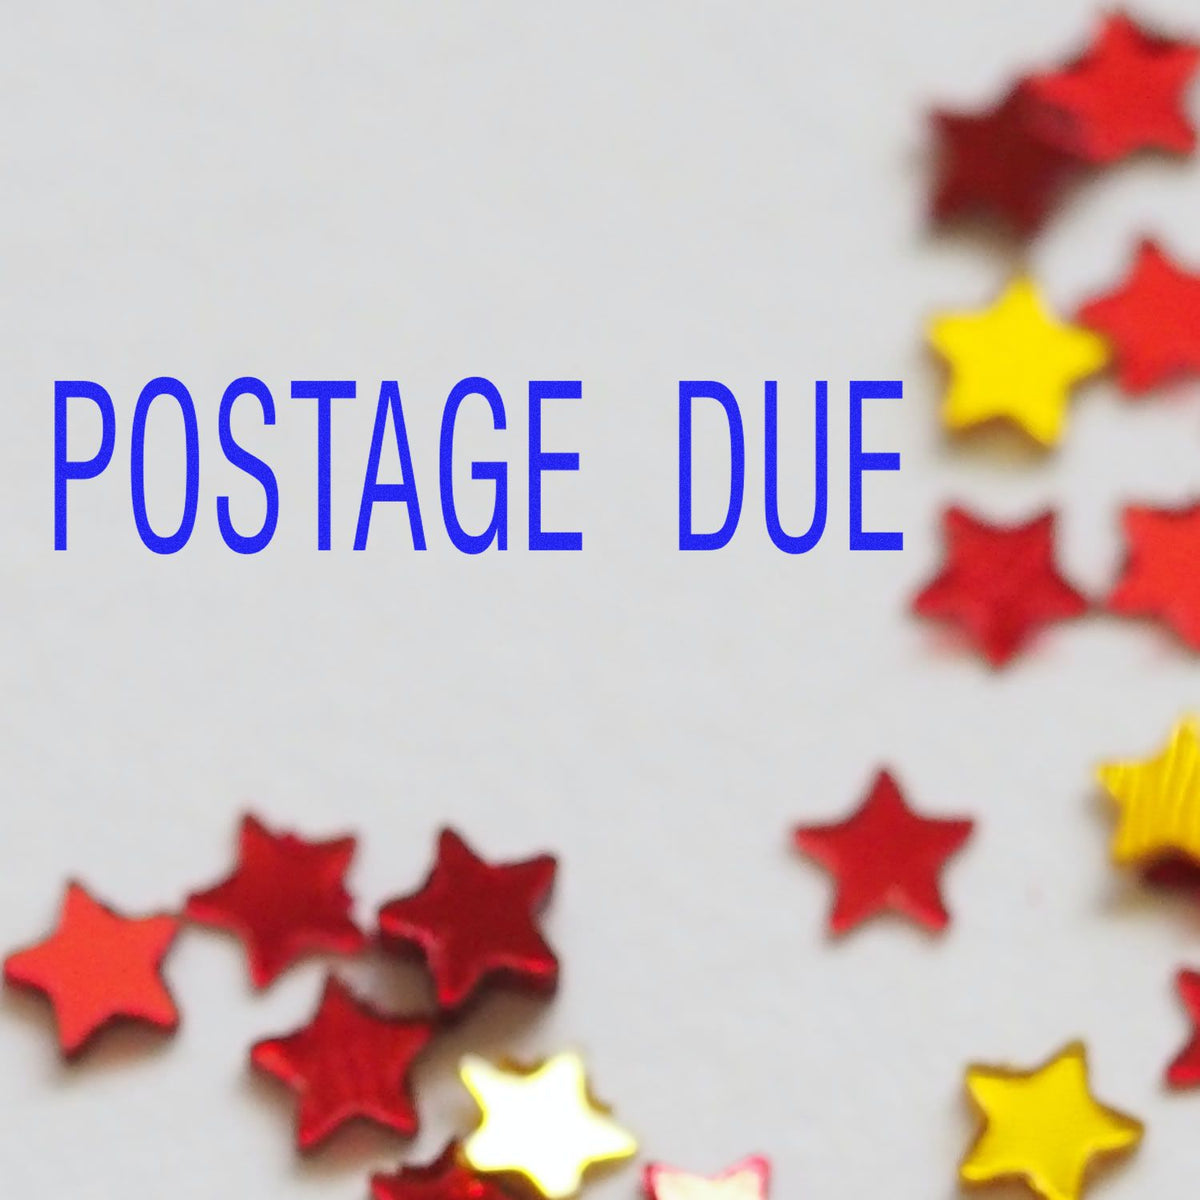 Postage Due Rubber Stamp In Use Photo